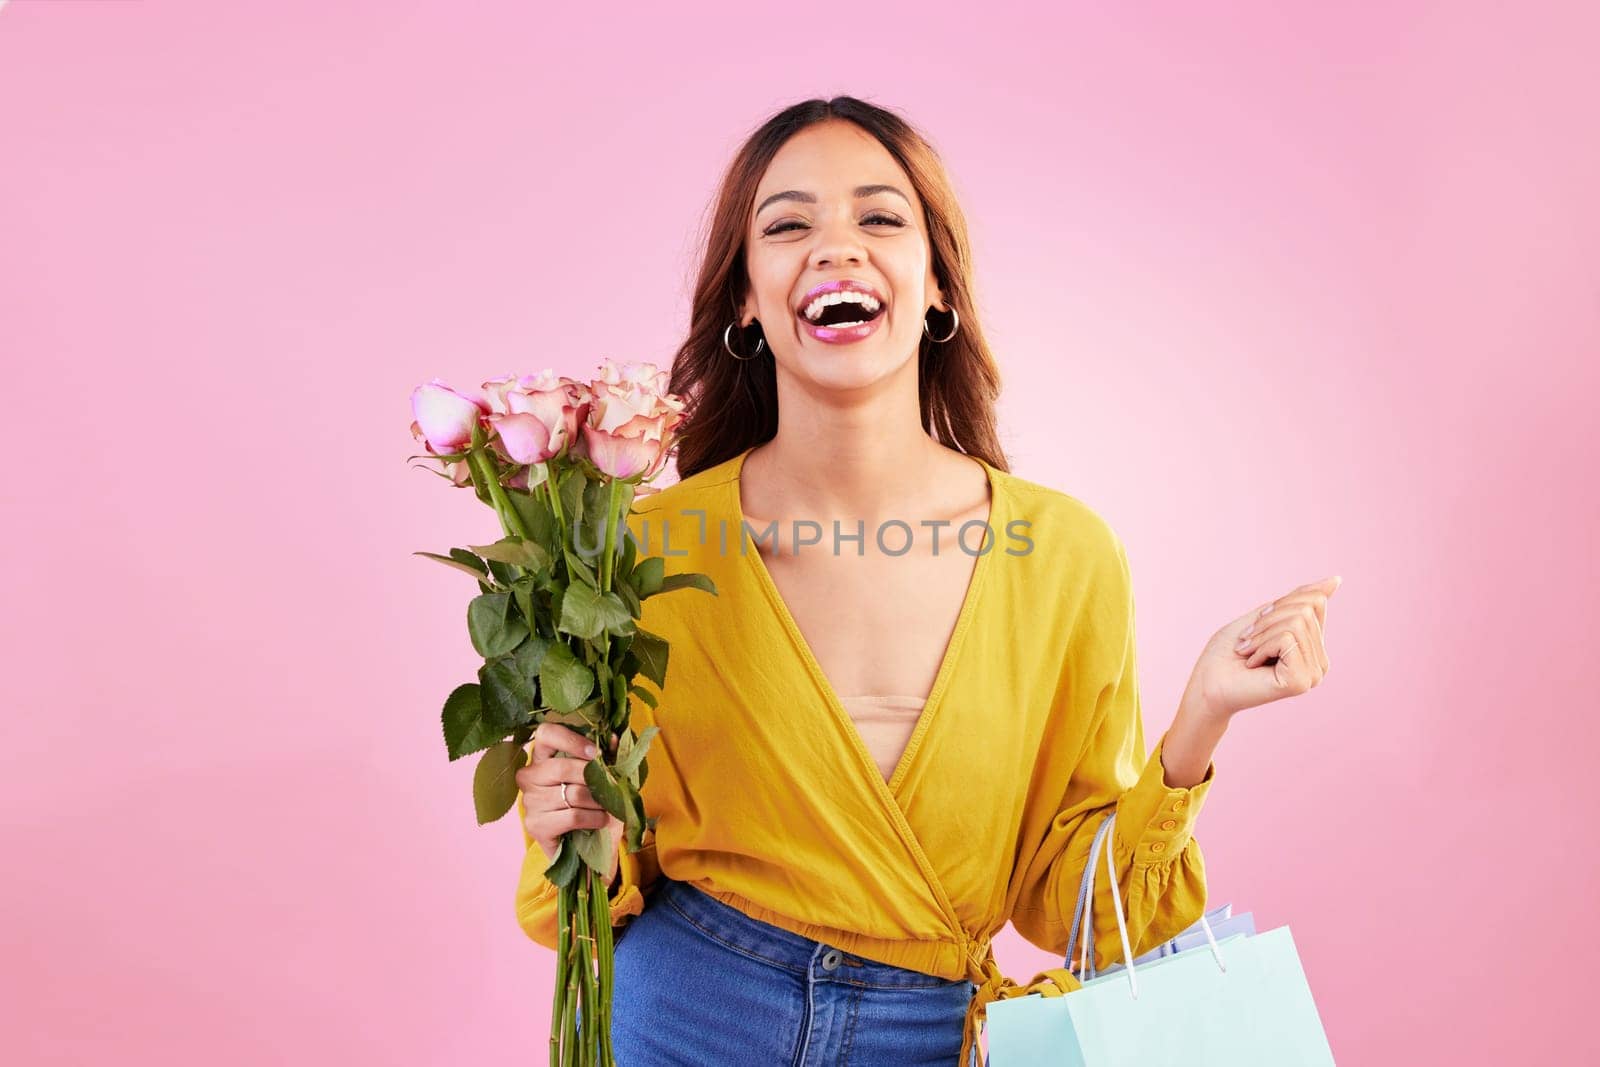 Happy, shopping bags and flowers with woman in studio for retail, birthday and spring. Event, party and celebration with female customer and roses on pink background for sale, discount and romance.